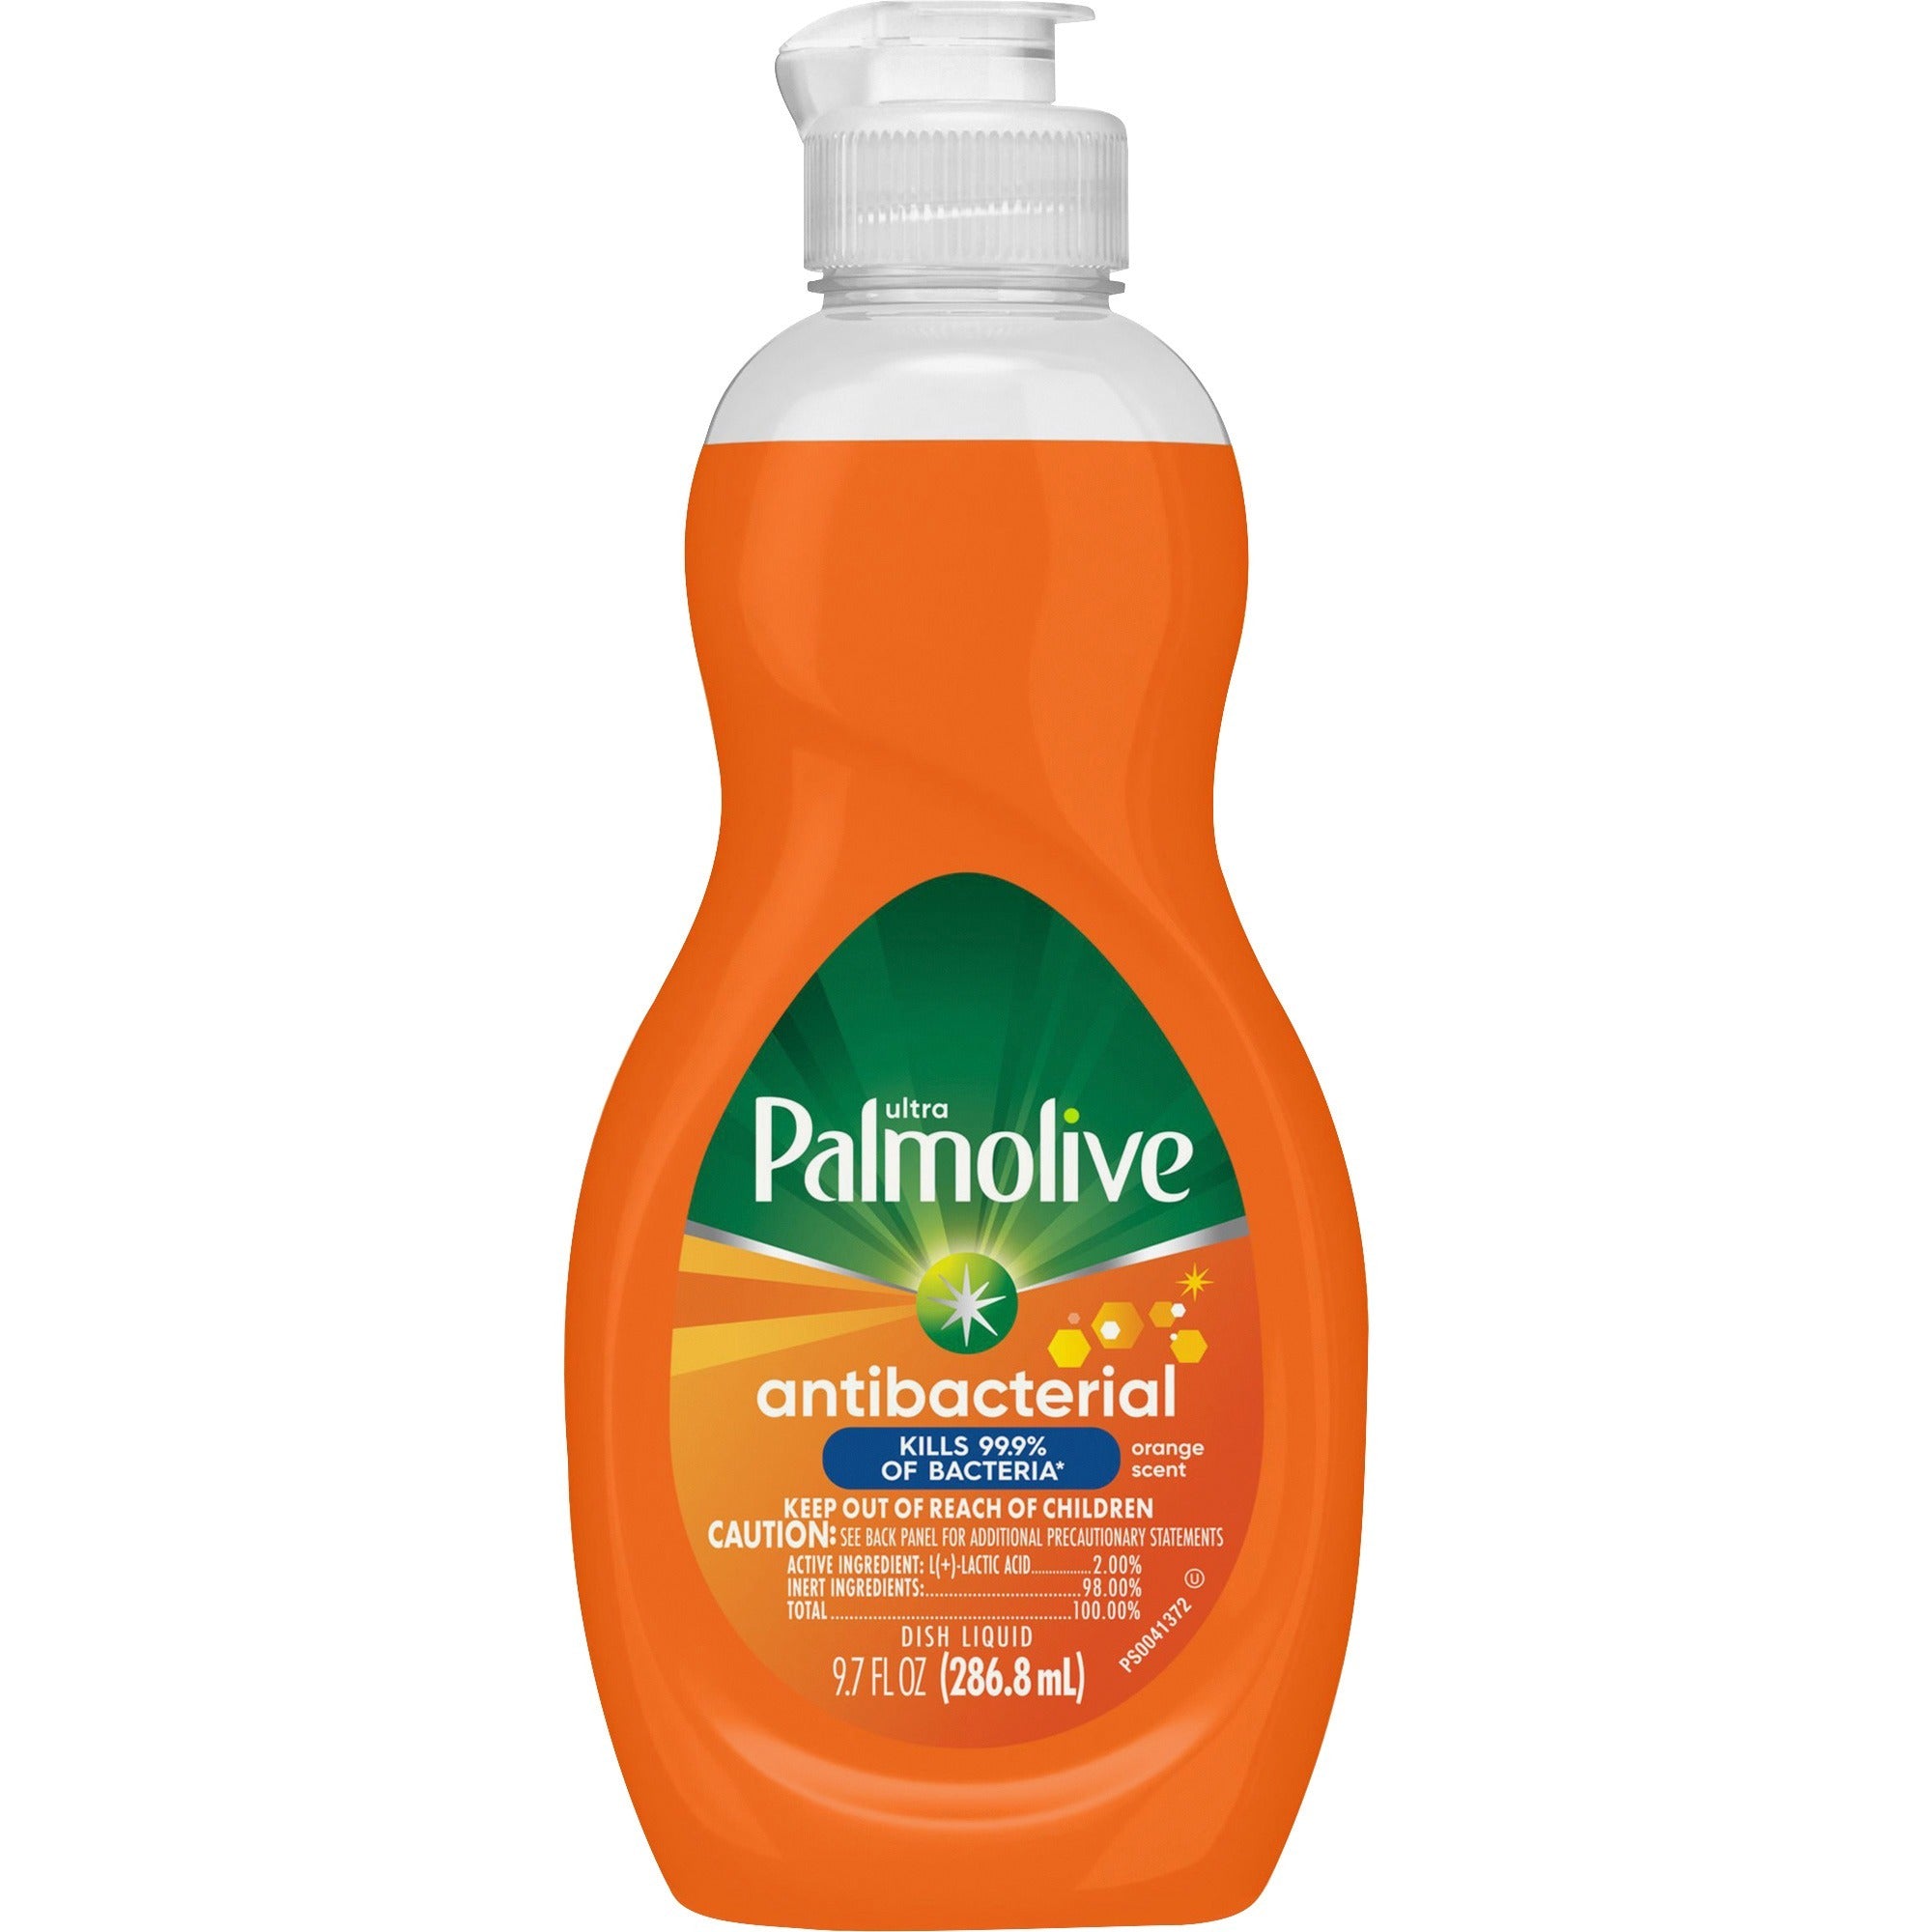 Palmolive Antibacterial Ultra Dish Soap - Concentrate - 9.7 fl oz (0.3 quart) - Mild Citrus Scent - 1 Each - Anti-bacterial, Non-abrasive, Phosphate-free, Residue-free - Orange - 1